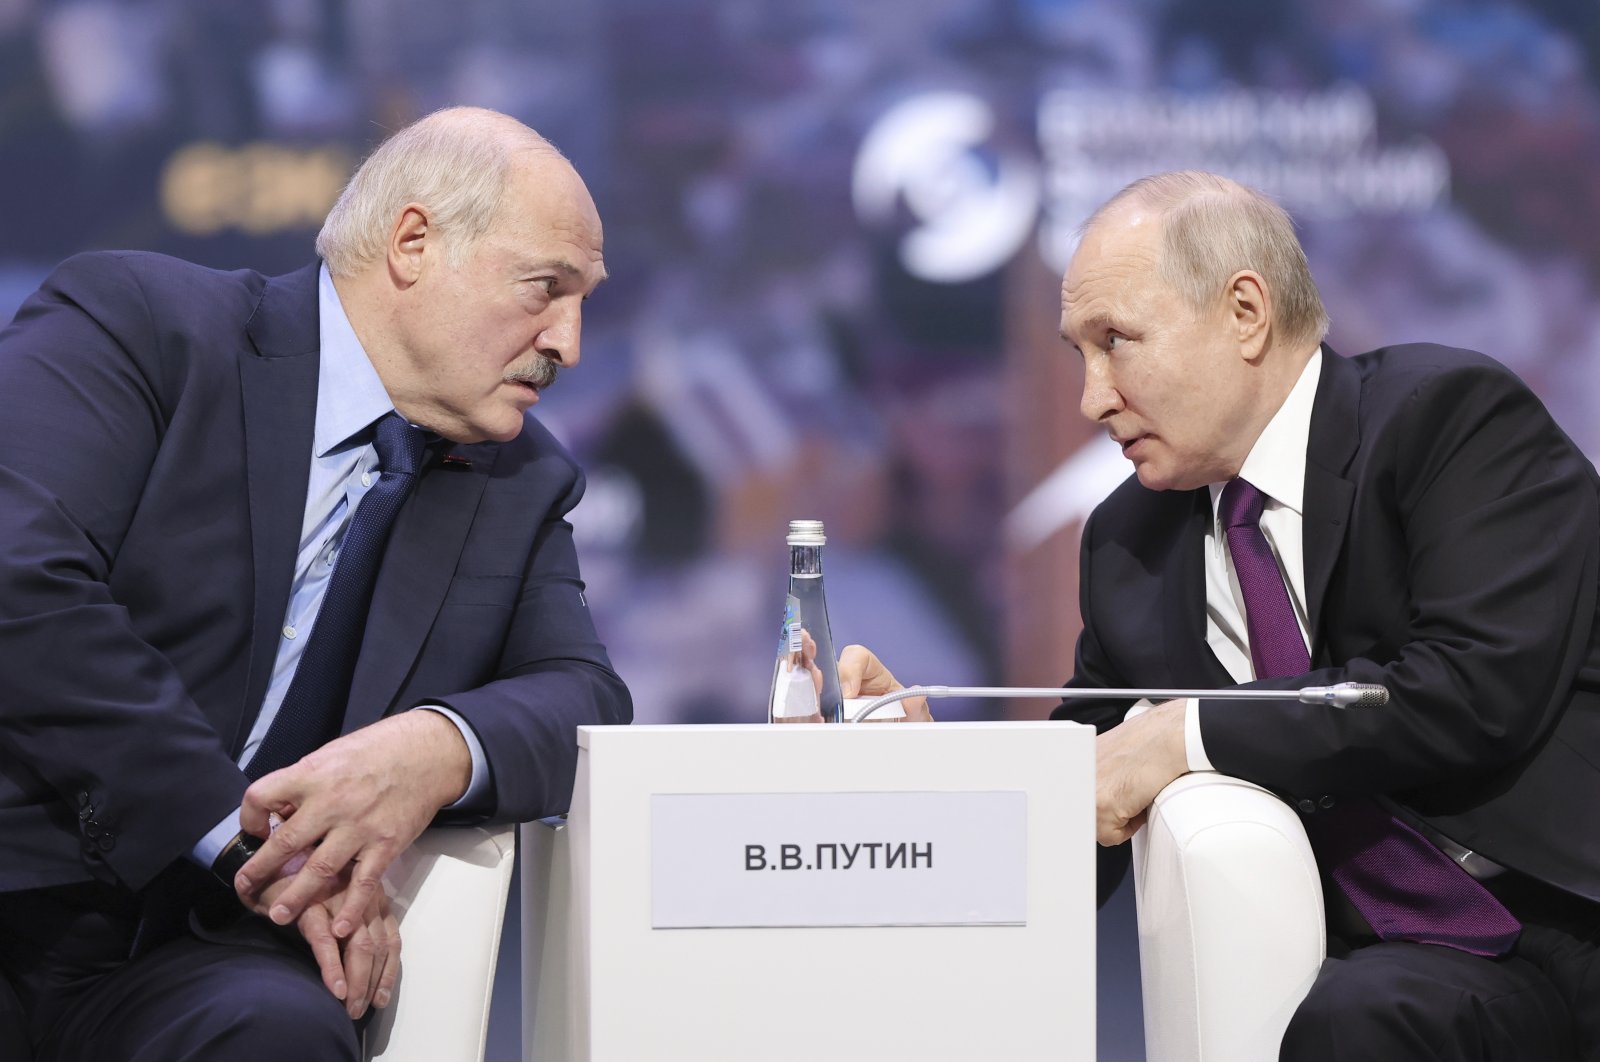 Russian President Vladimir Putin (R) and Belarusian President Alexander Lukashenko talk to each other during the plenary session of the Eurasian Economic Forum in Moscow, Russia, May 24, 2023. (AP Photo)